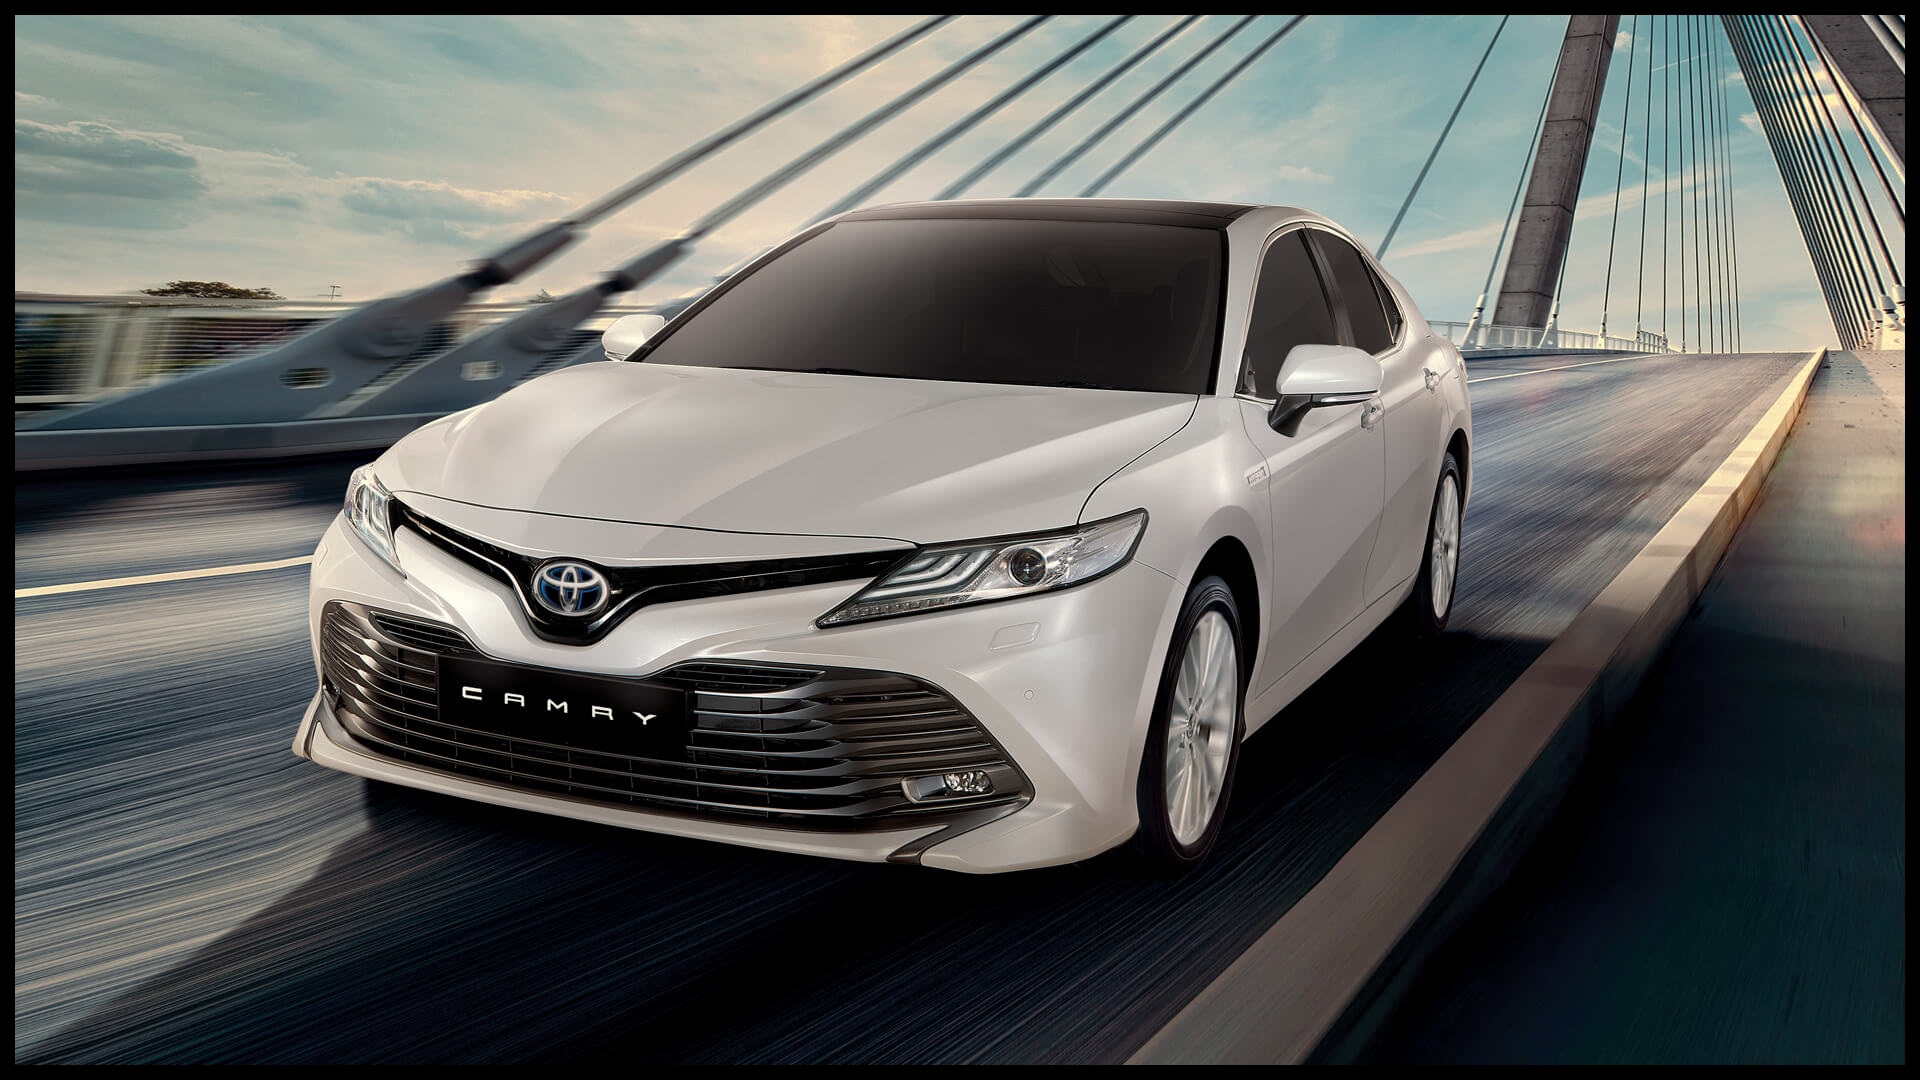 New toyota Camry 2018 Prices In Pakistan and Reviews Reviews